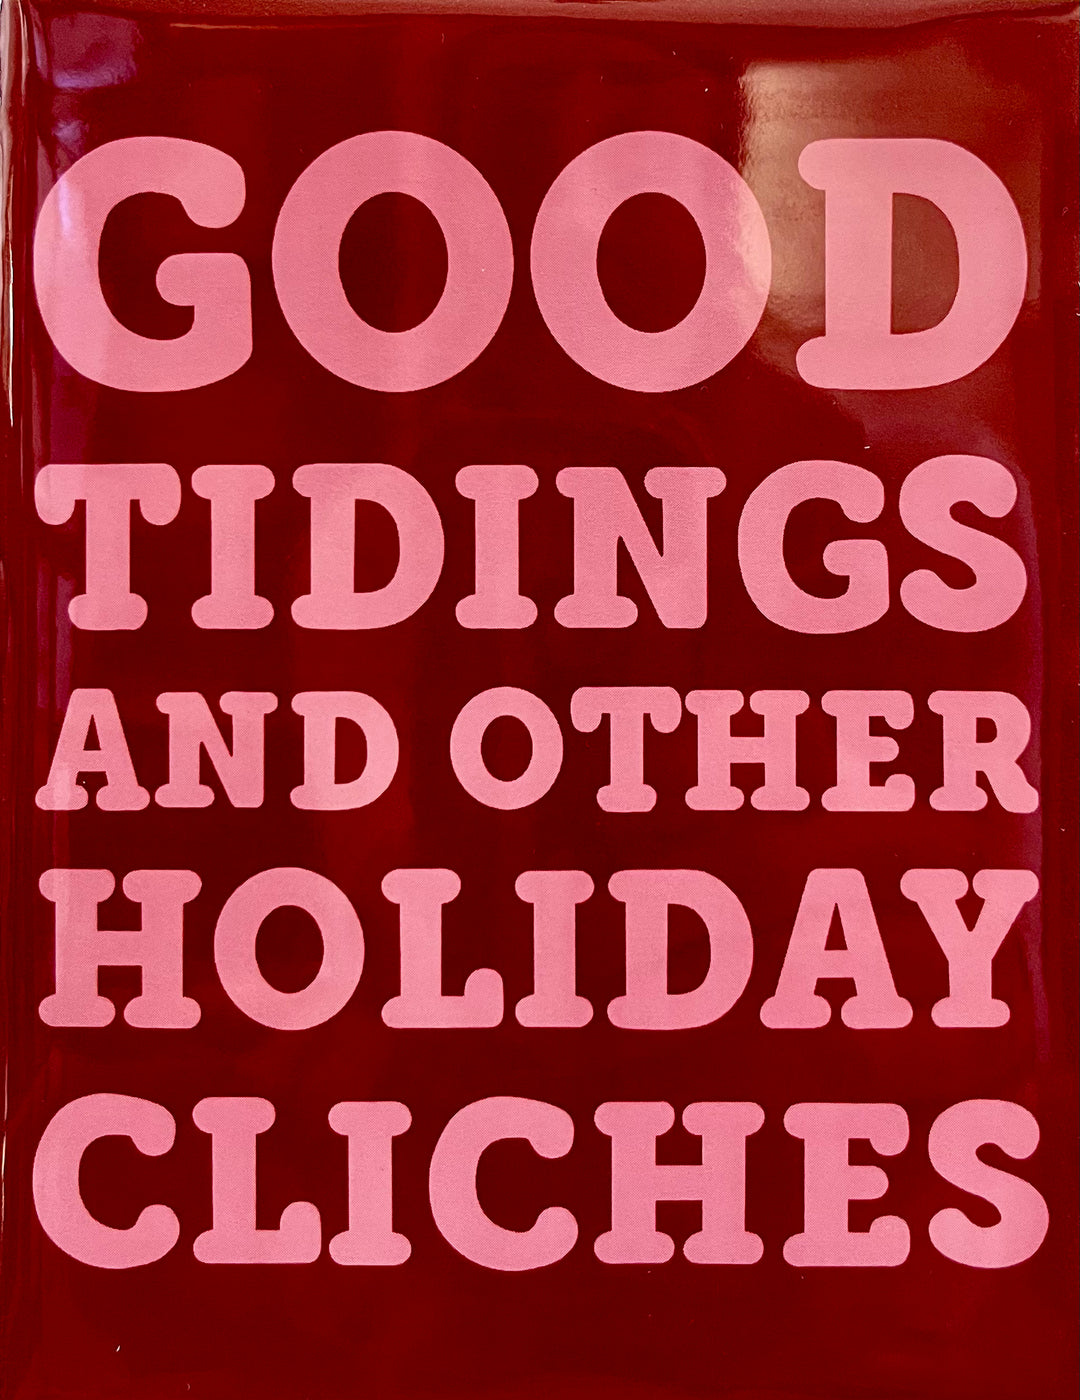 Good Tidings And Other Holidat Cliches Greeting Card